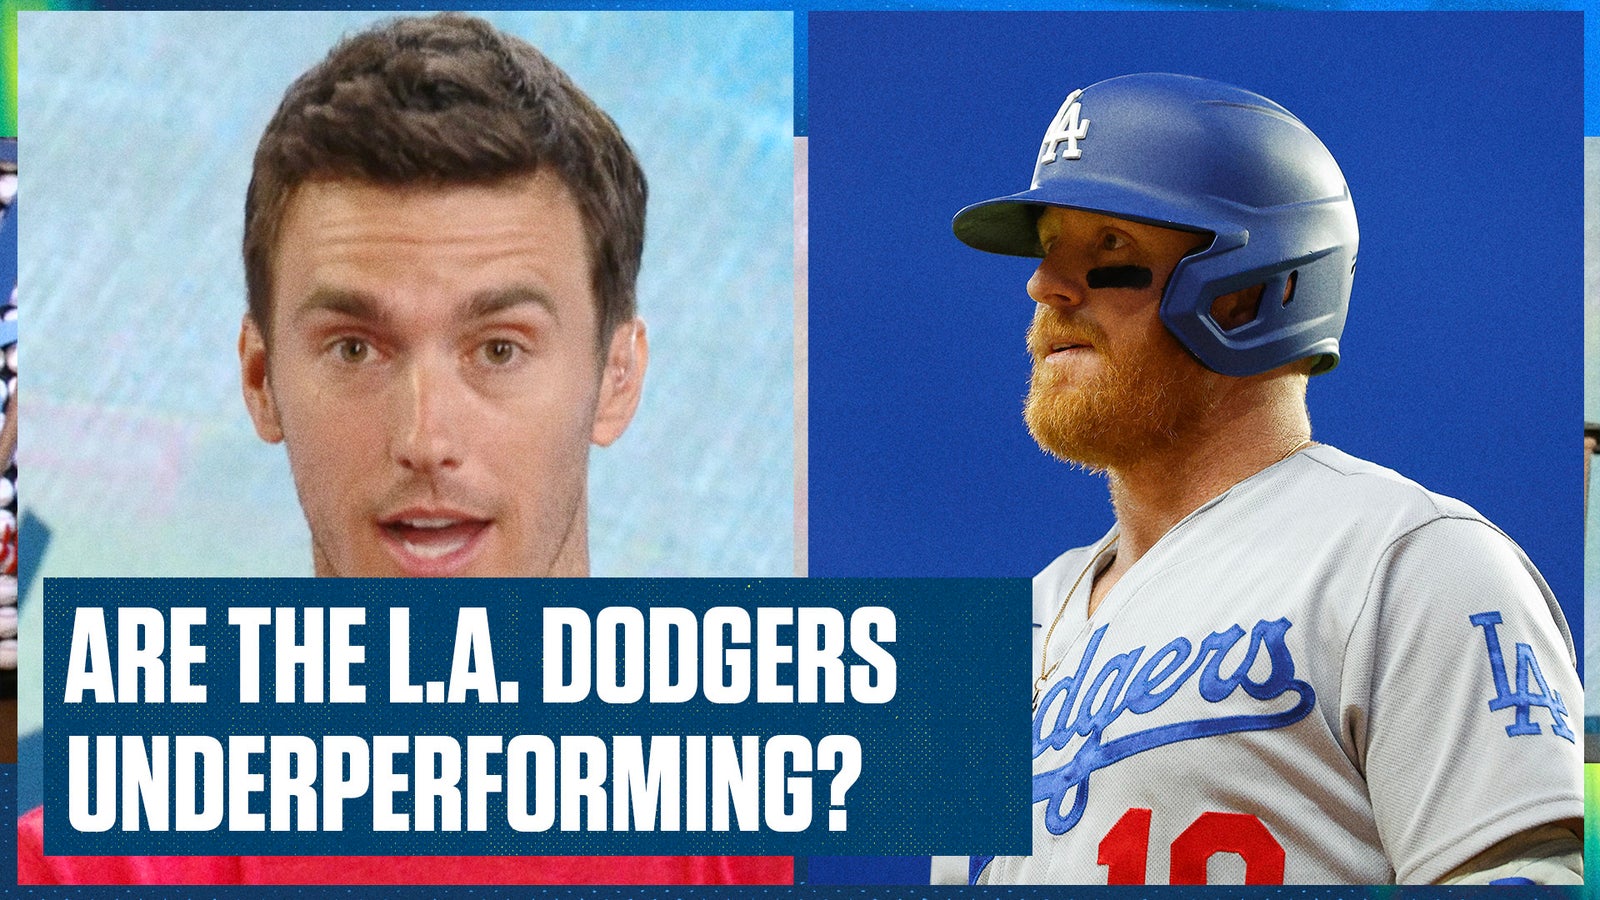 Are the Dodgers underperforming? Will the Padres be a playoff team?